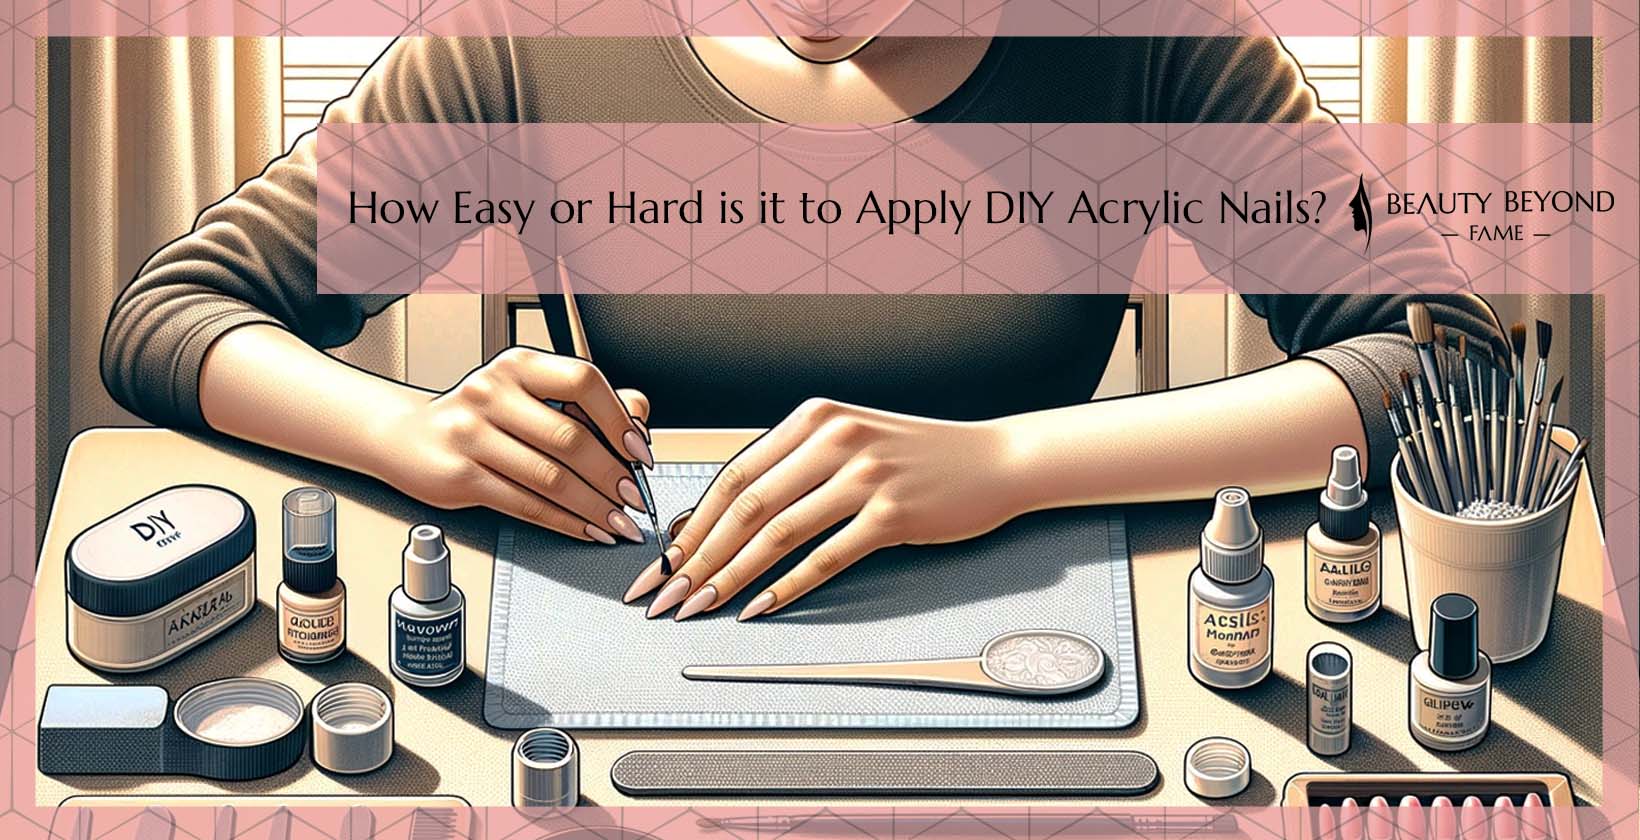 Guide to Difficulty of Applying DIY Acrylic Nails